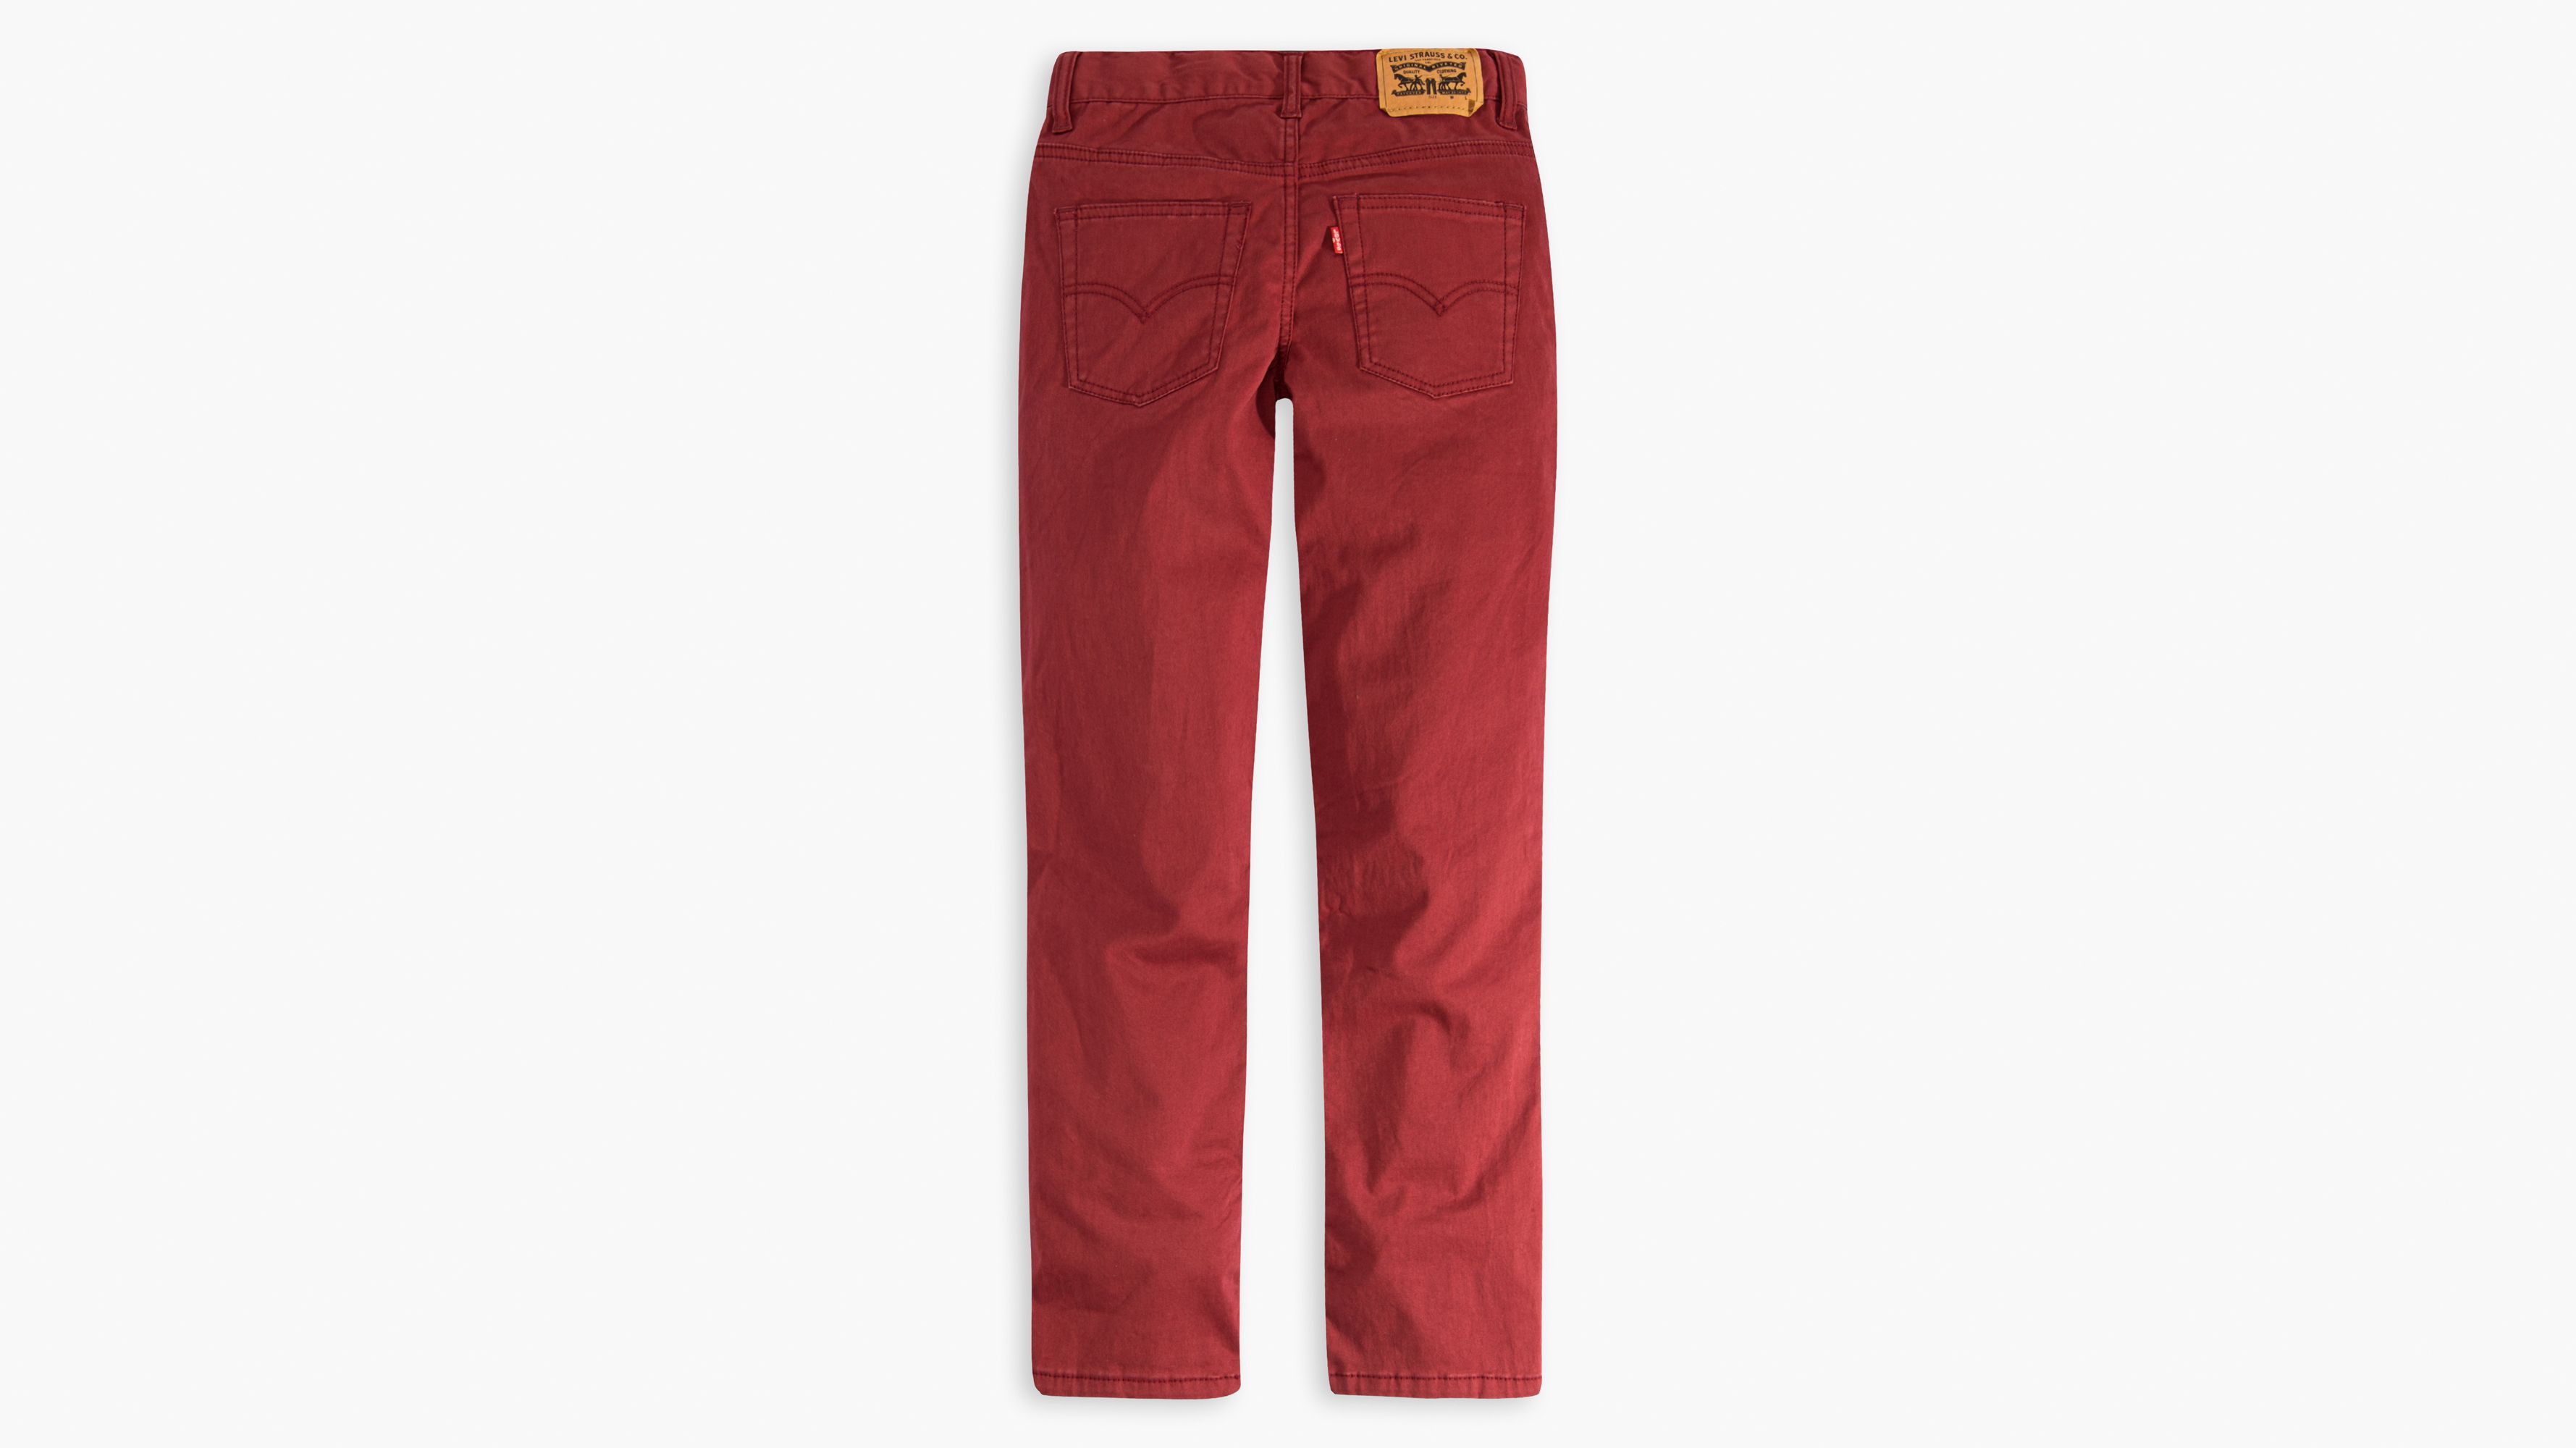 levis 511 red